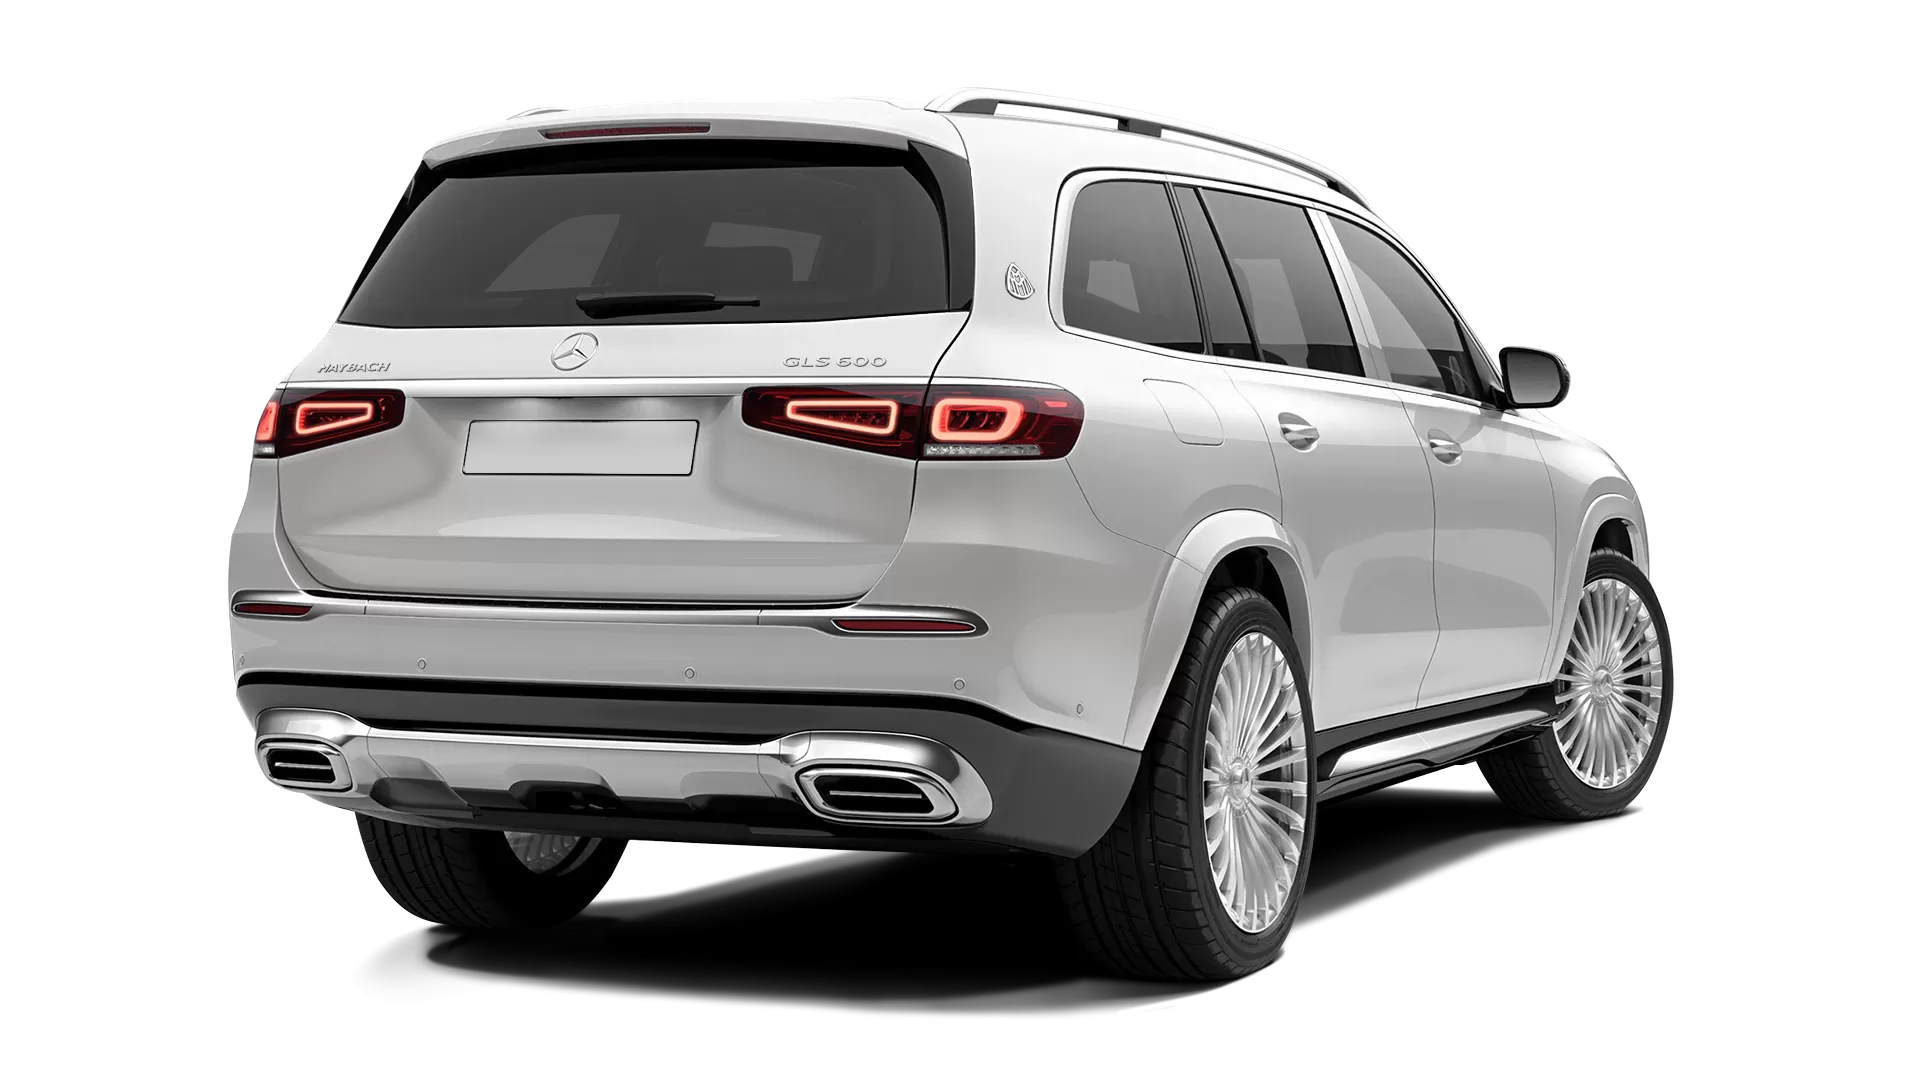 Mercedes Maybach GLS 600 stock rear view in Diamond White color